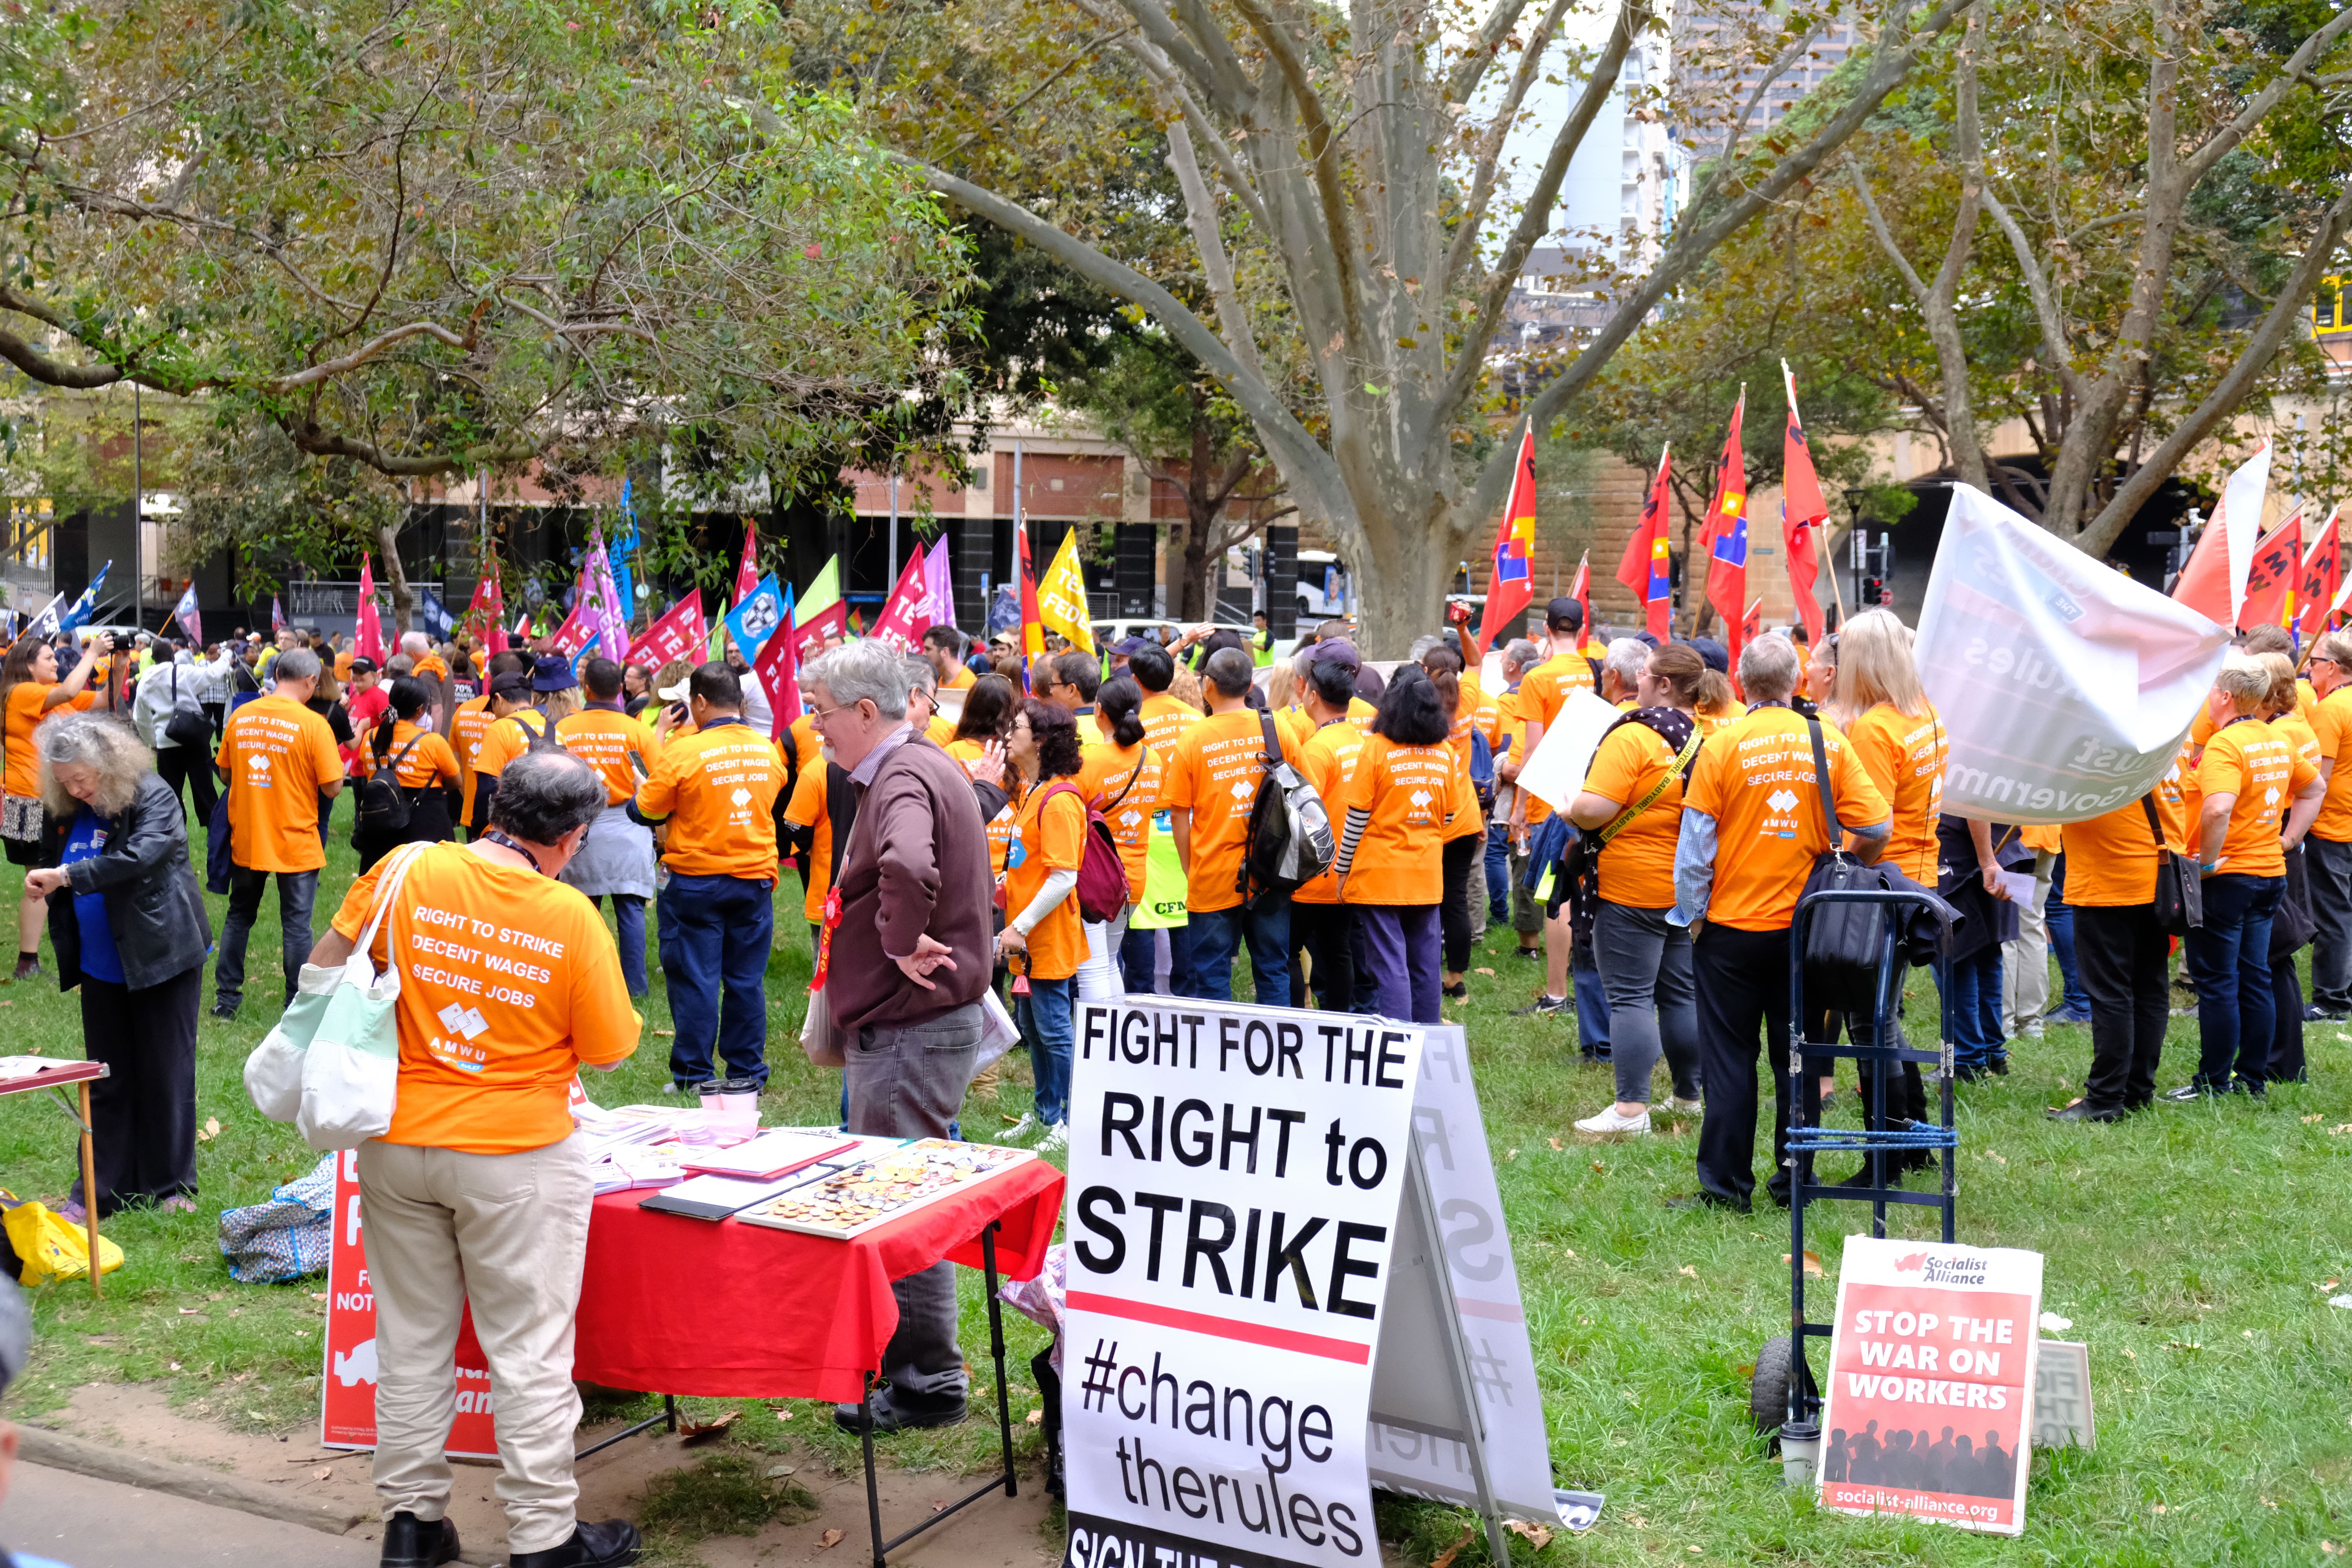 The March congregates in Belmore Park. The picture shows many AMWU workers holding flags in orange shirts.